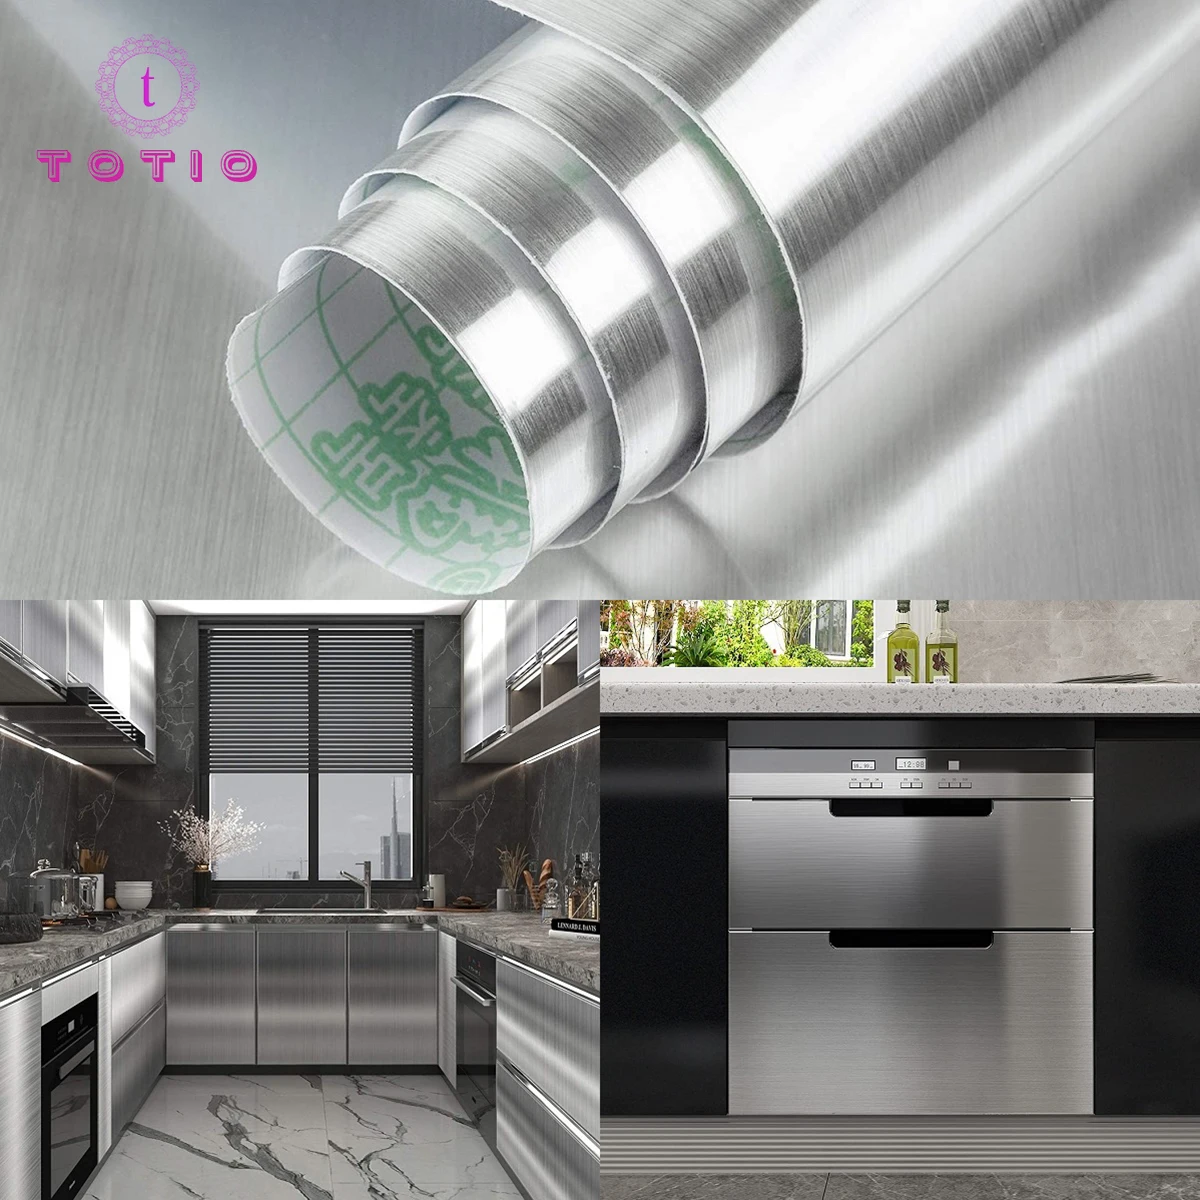 TOTIO Waterproof Silver Wallpaper Self Adhesive Stainless Steel Wallpaper Heat Resistance Vinyl Oilproof House Appliance Kitchen direct drinking water faucet kitchen sink tap rotation stainless steel no lead drinking faucet g 1 2 or g 1 4